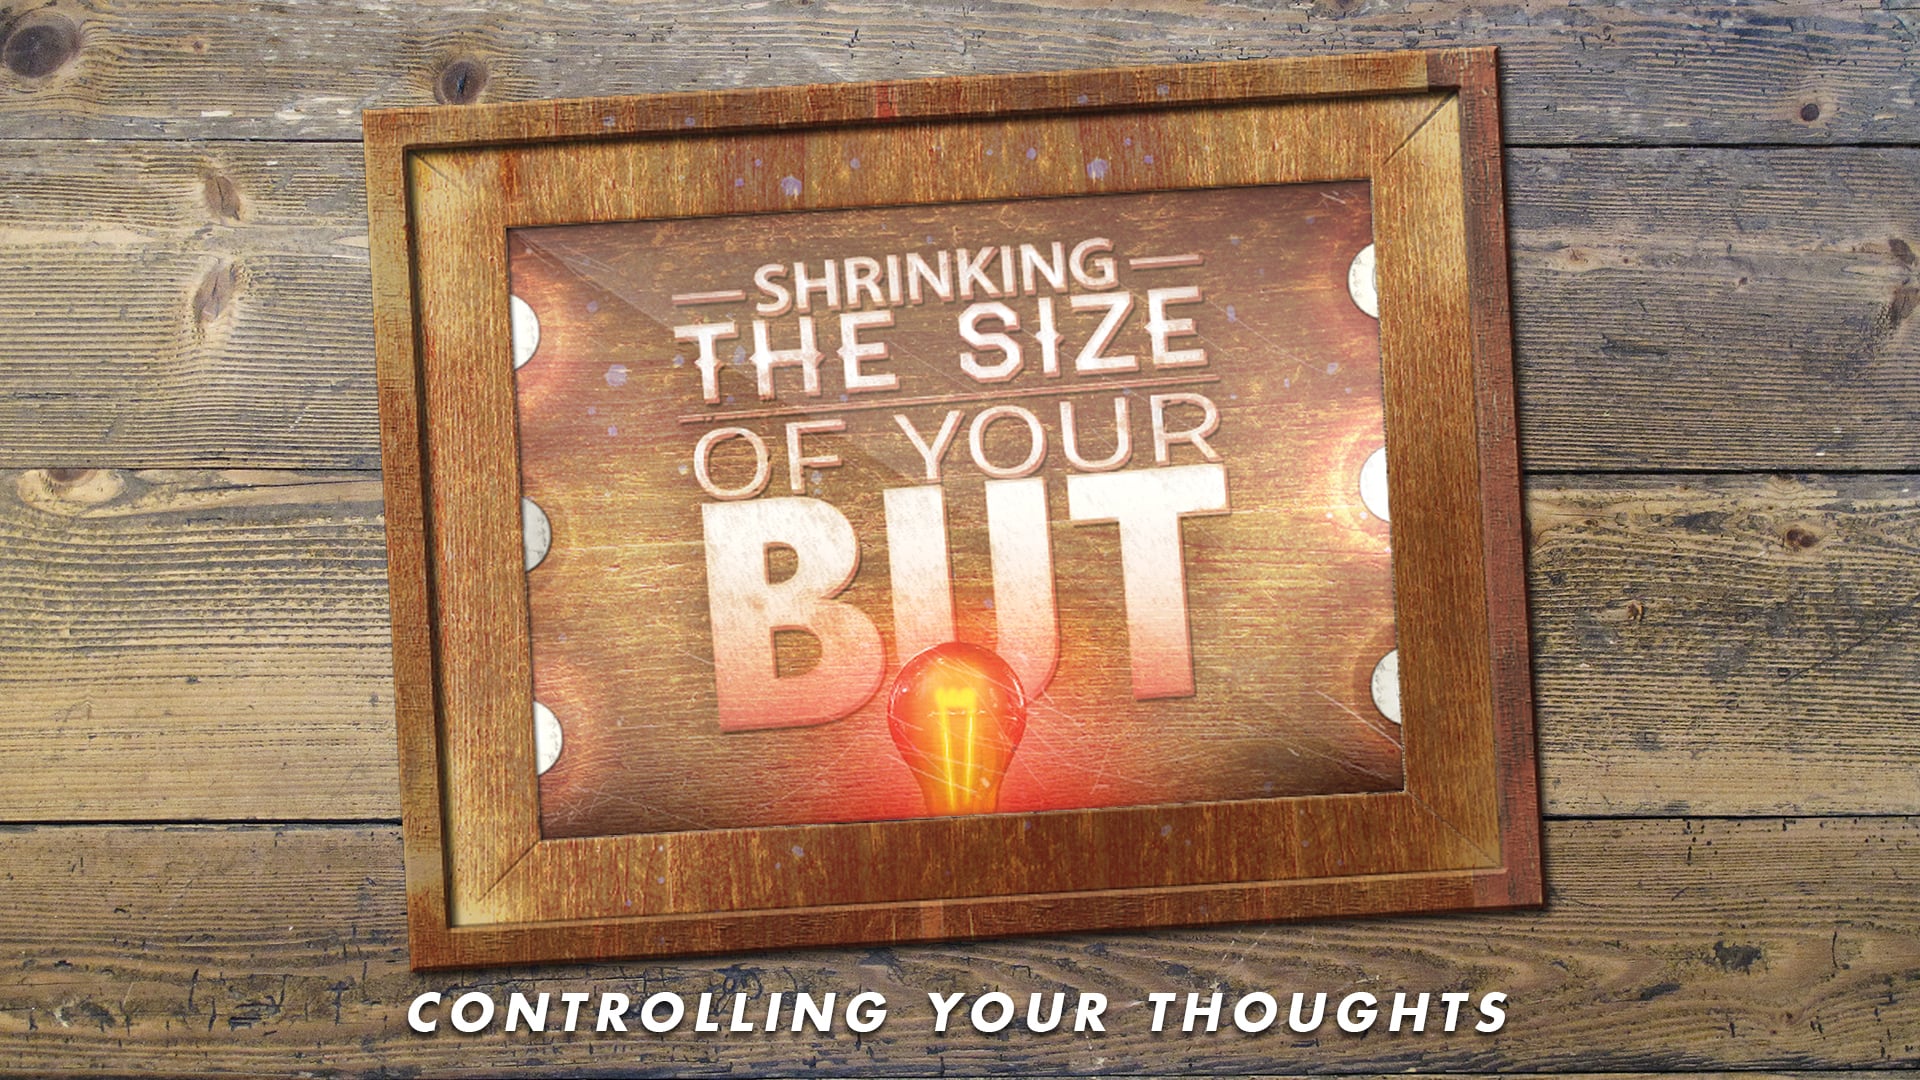 Controlling Your Thoughts